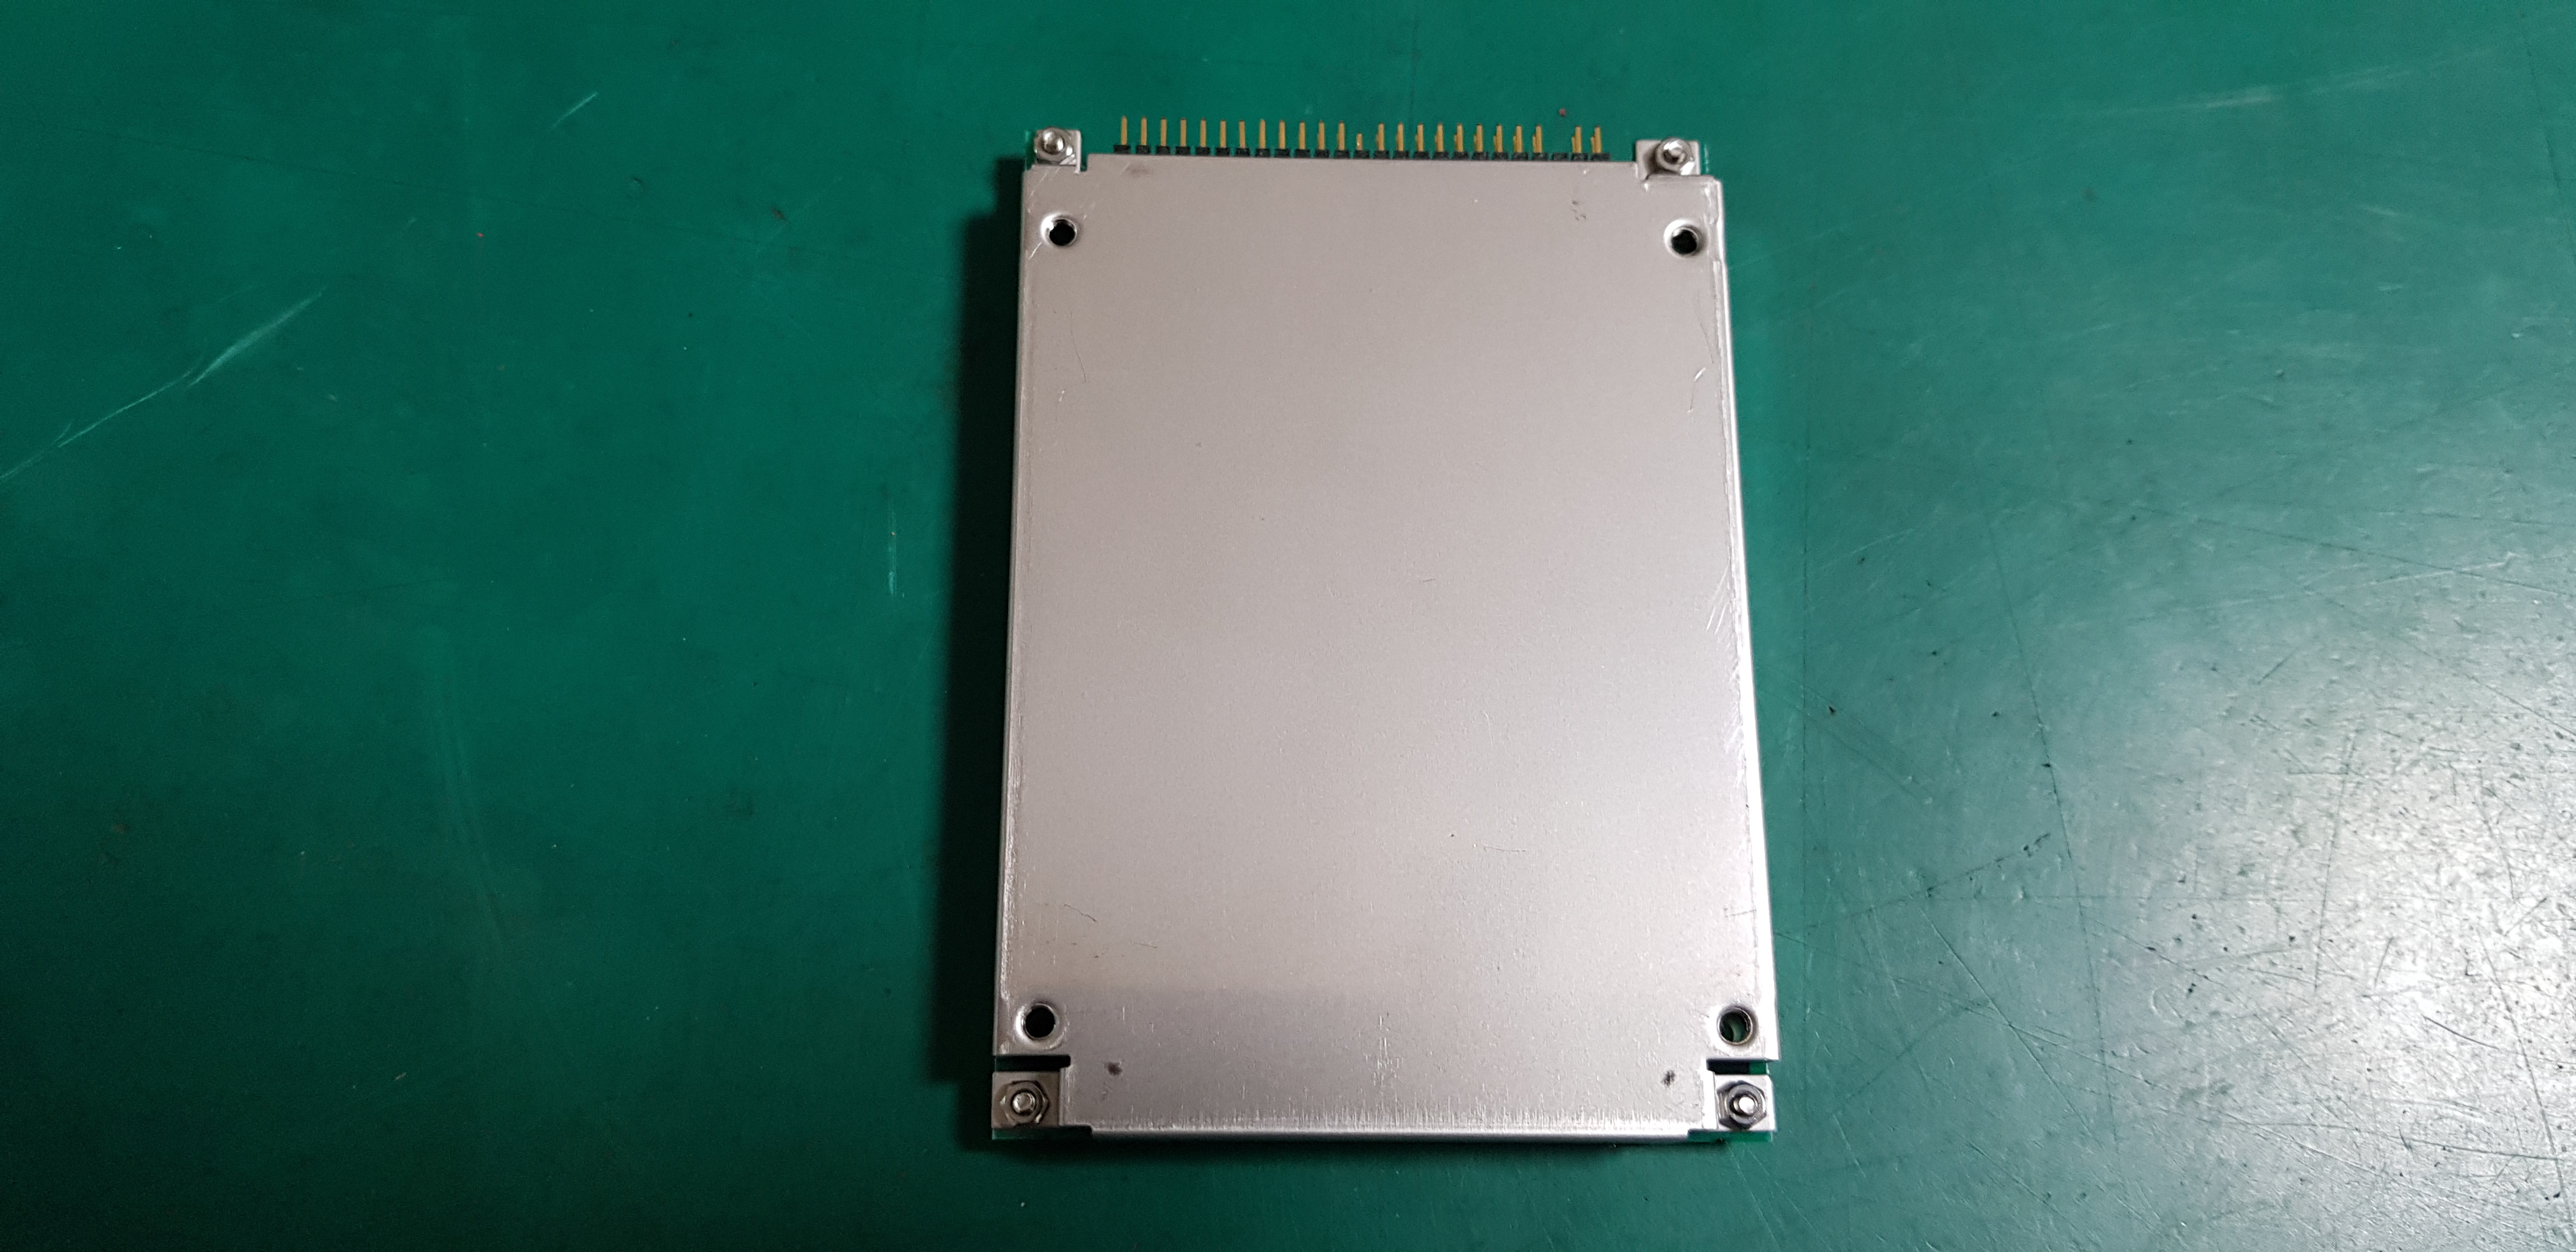 SOLID STATE DRIVE MS973FMD080Y-N6100S0008 (A급 미사용품)